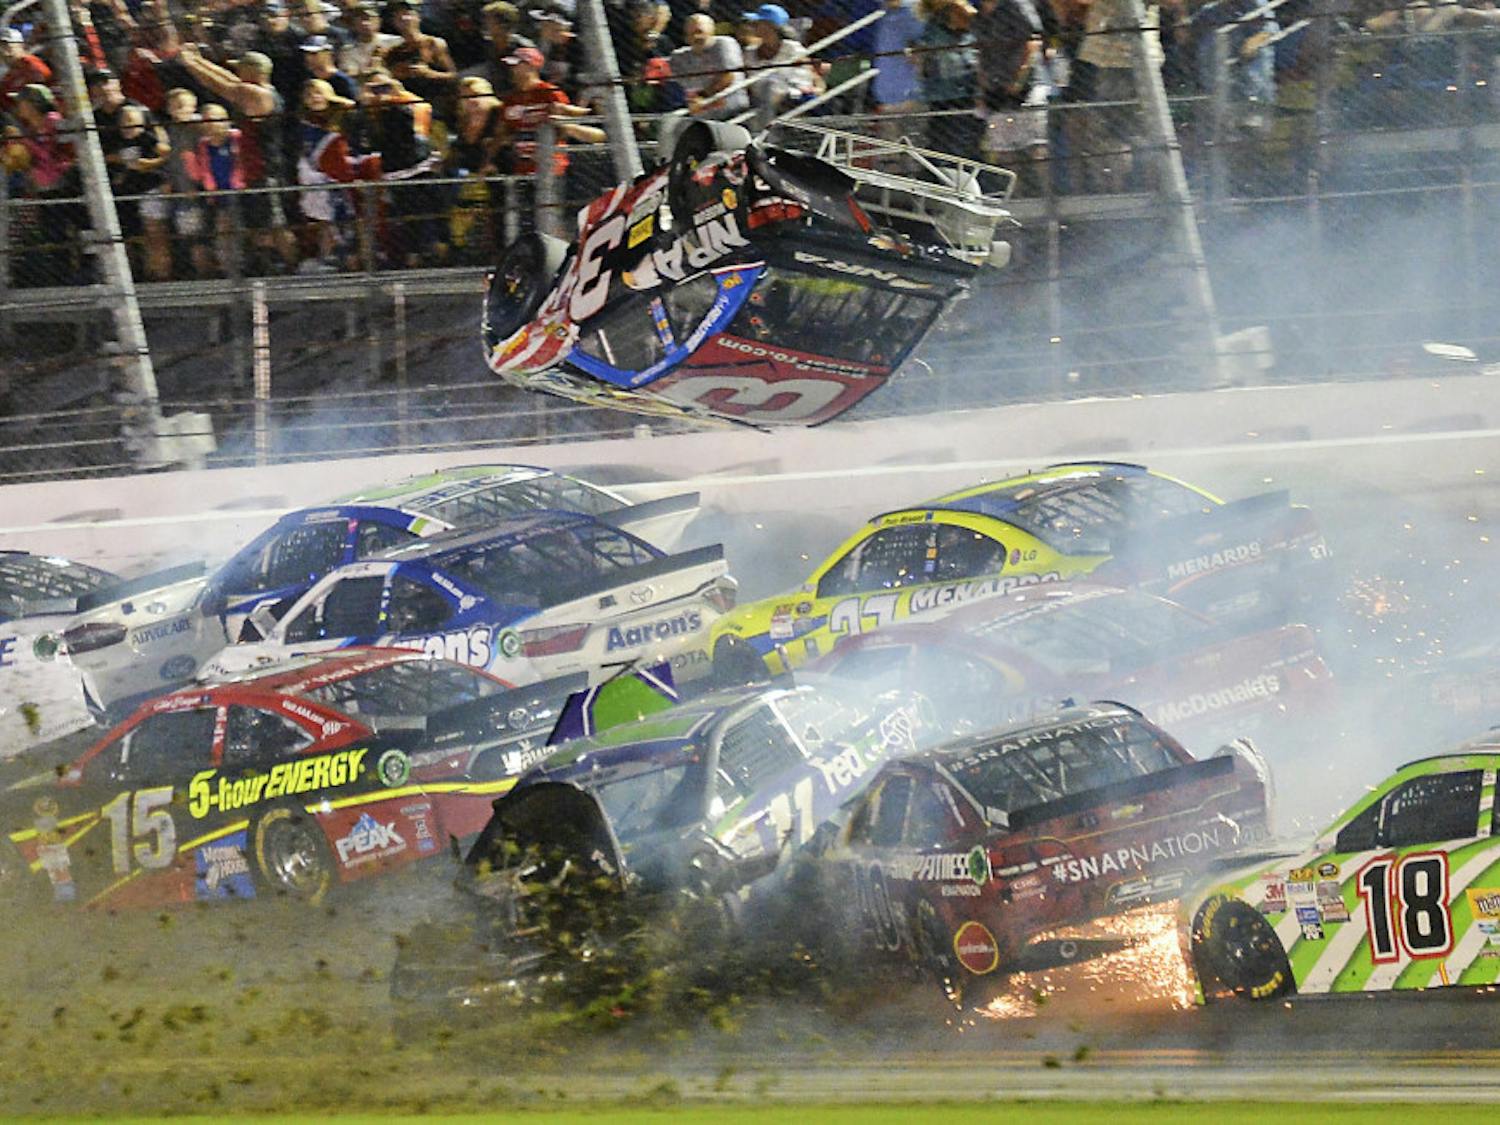 Austin Dillon (3) goes airborne as he was involved in a multi-car crash on the final lap of the NASCAR Sprint Cup series auto race at Daytona International Speedway in Daytona Beach, Florida.